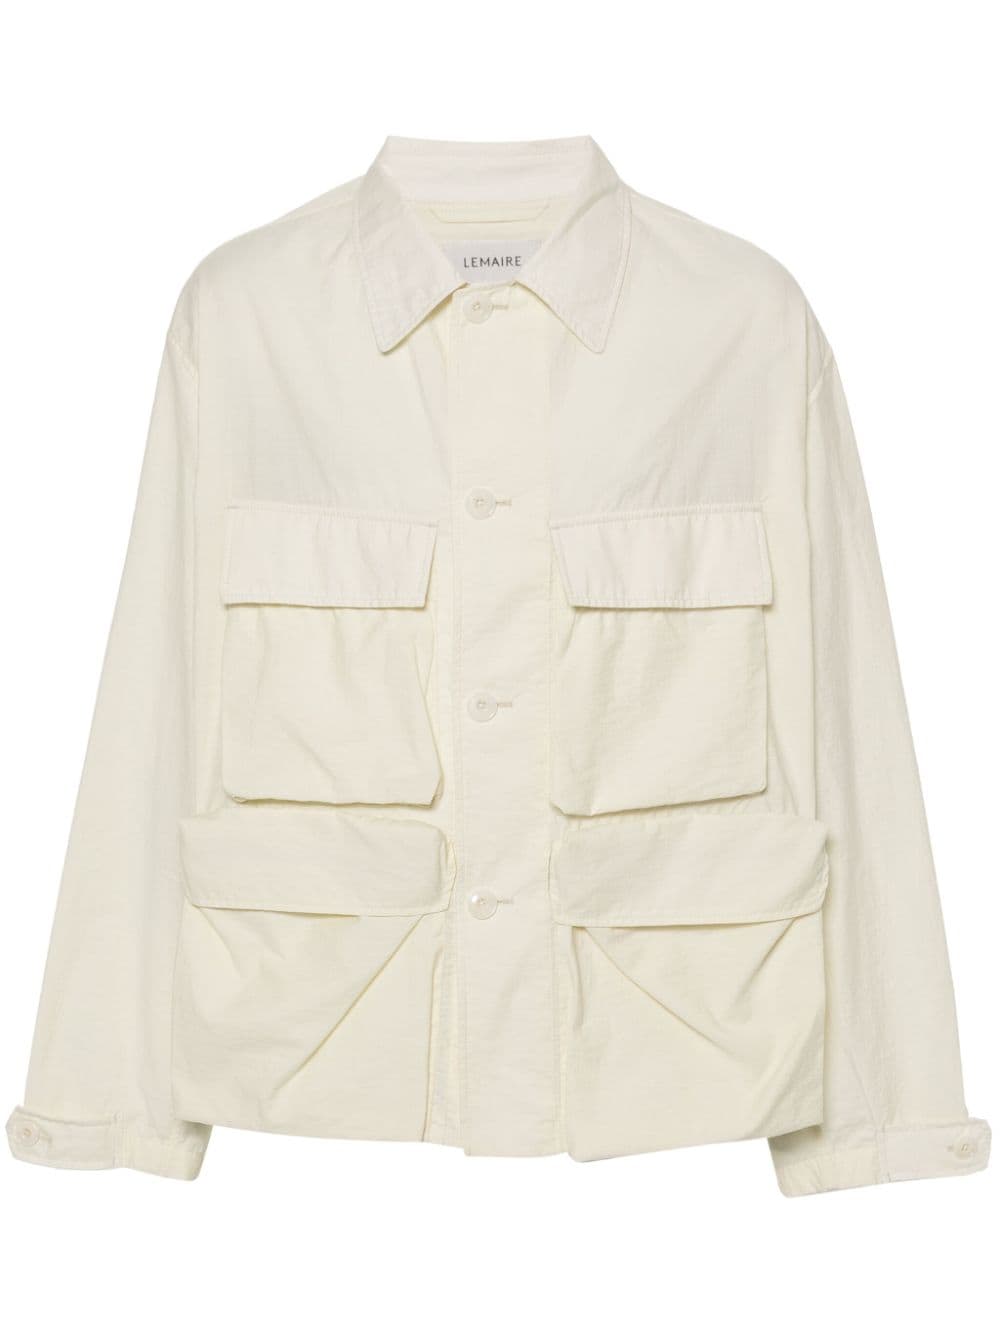 Image 1 of LEMAIRE Light Field jacket